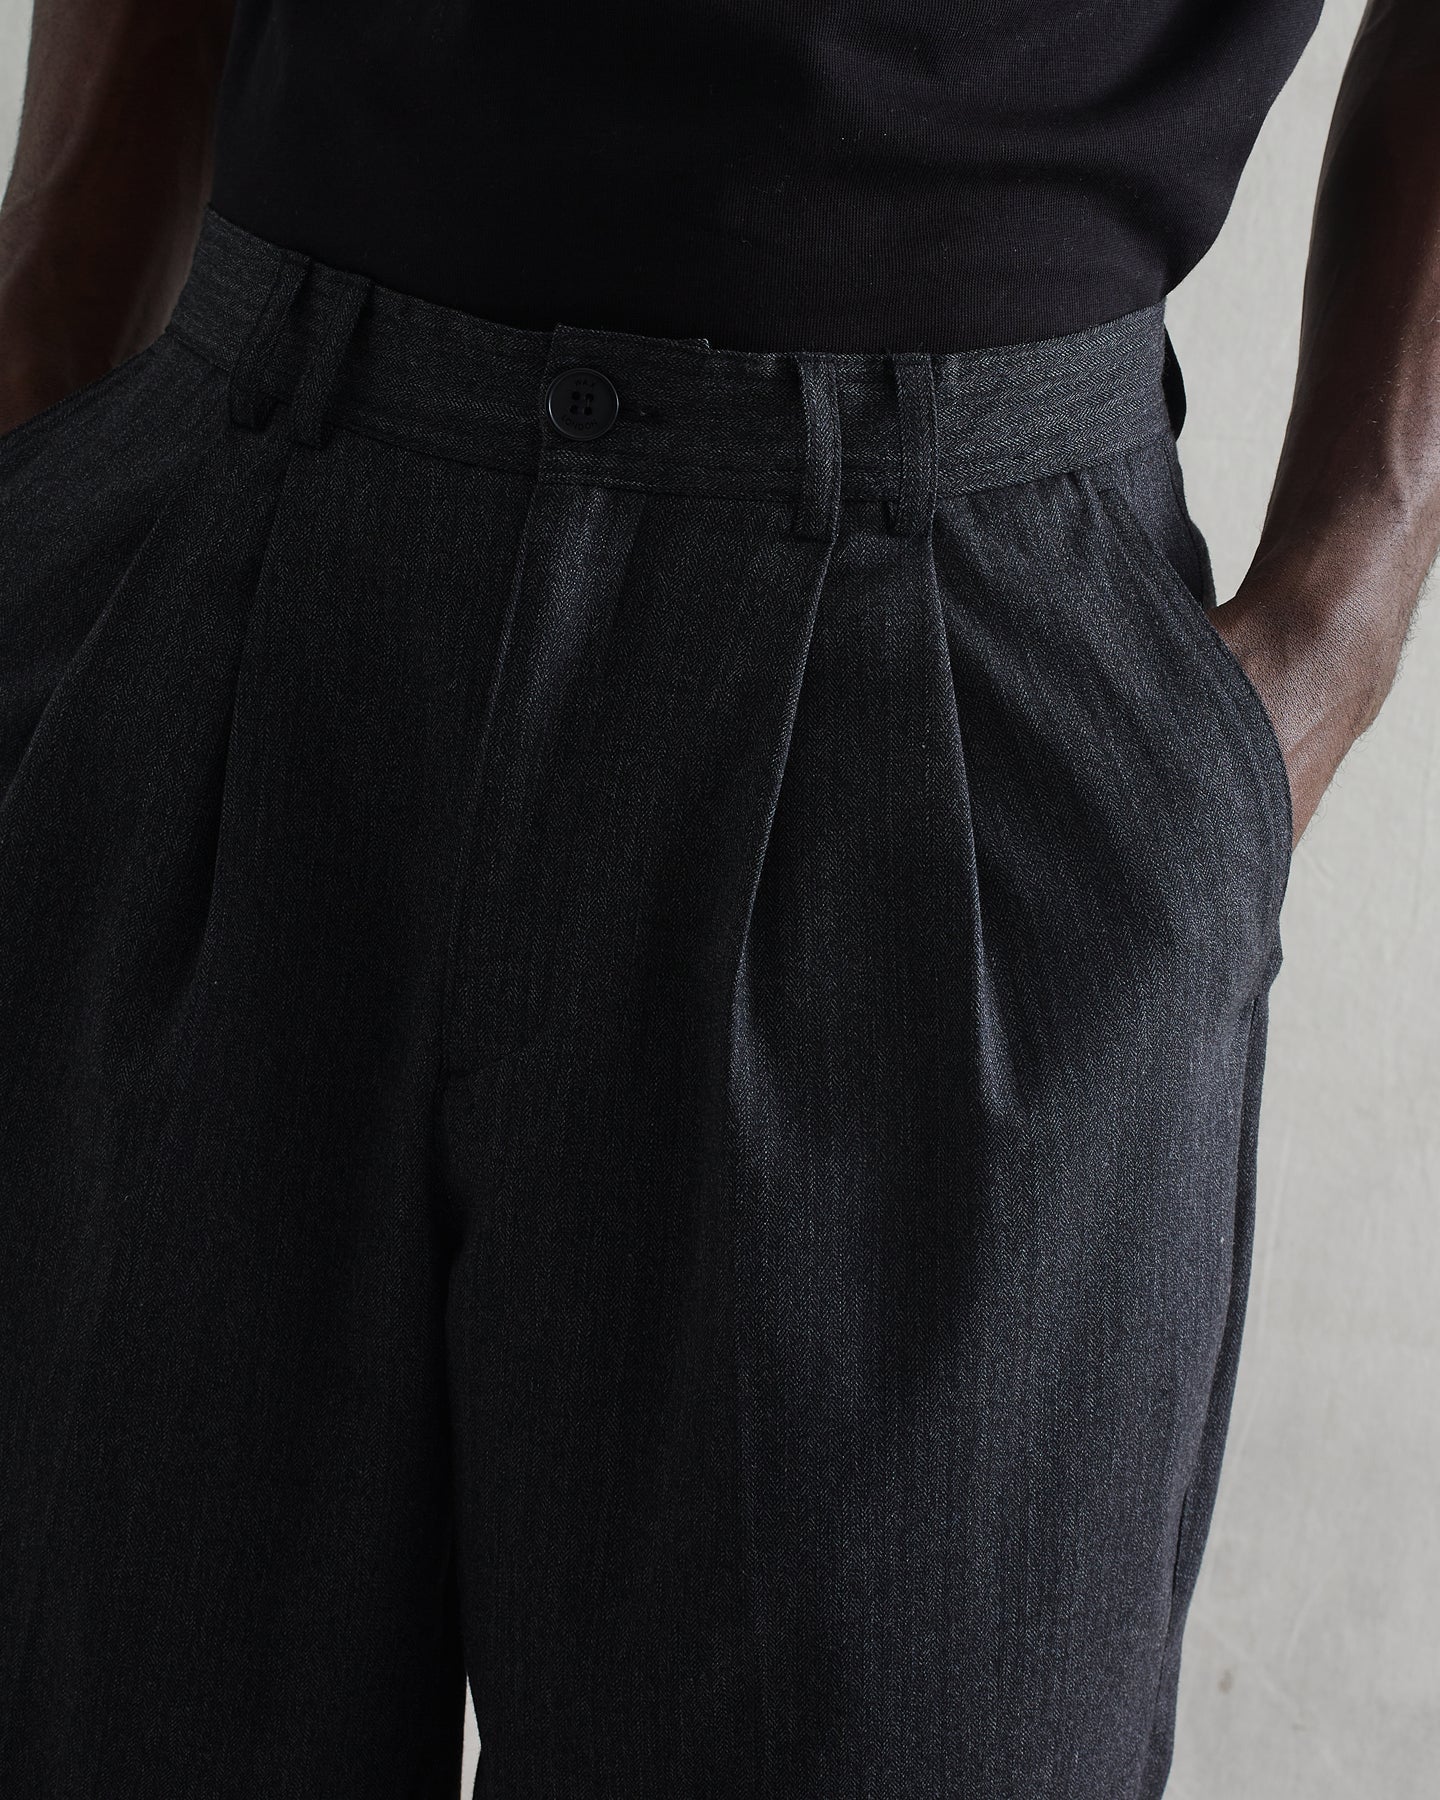 WAX Raleigh Pleat Trousers, Charcoal